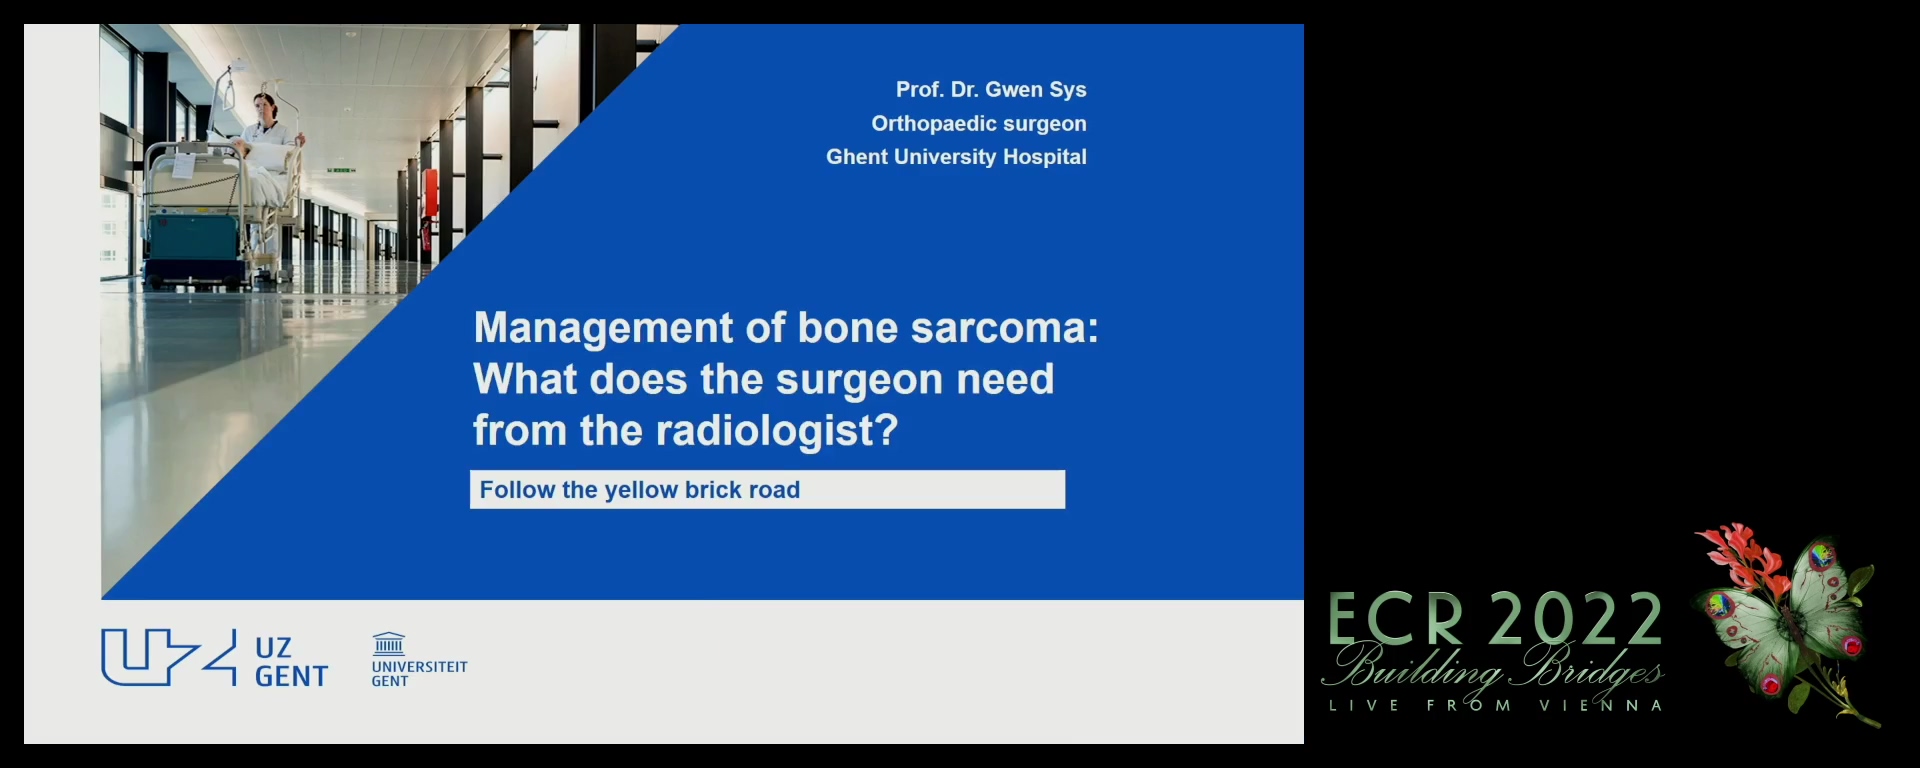 What does the oncologic orthopaedic surgeon need from the radiologist?